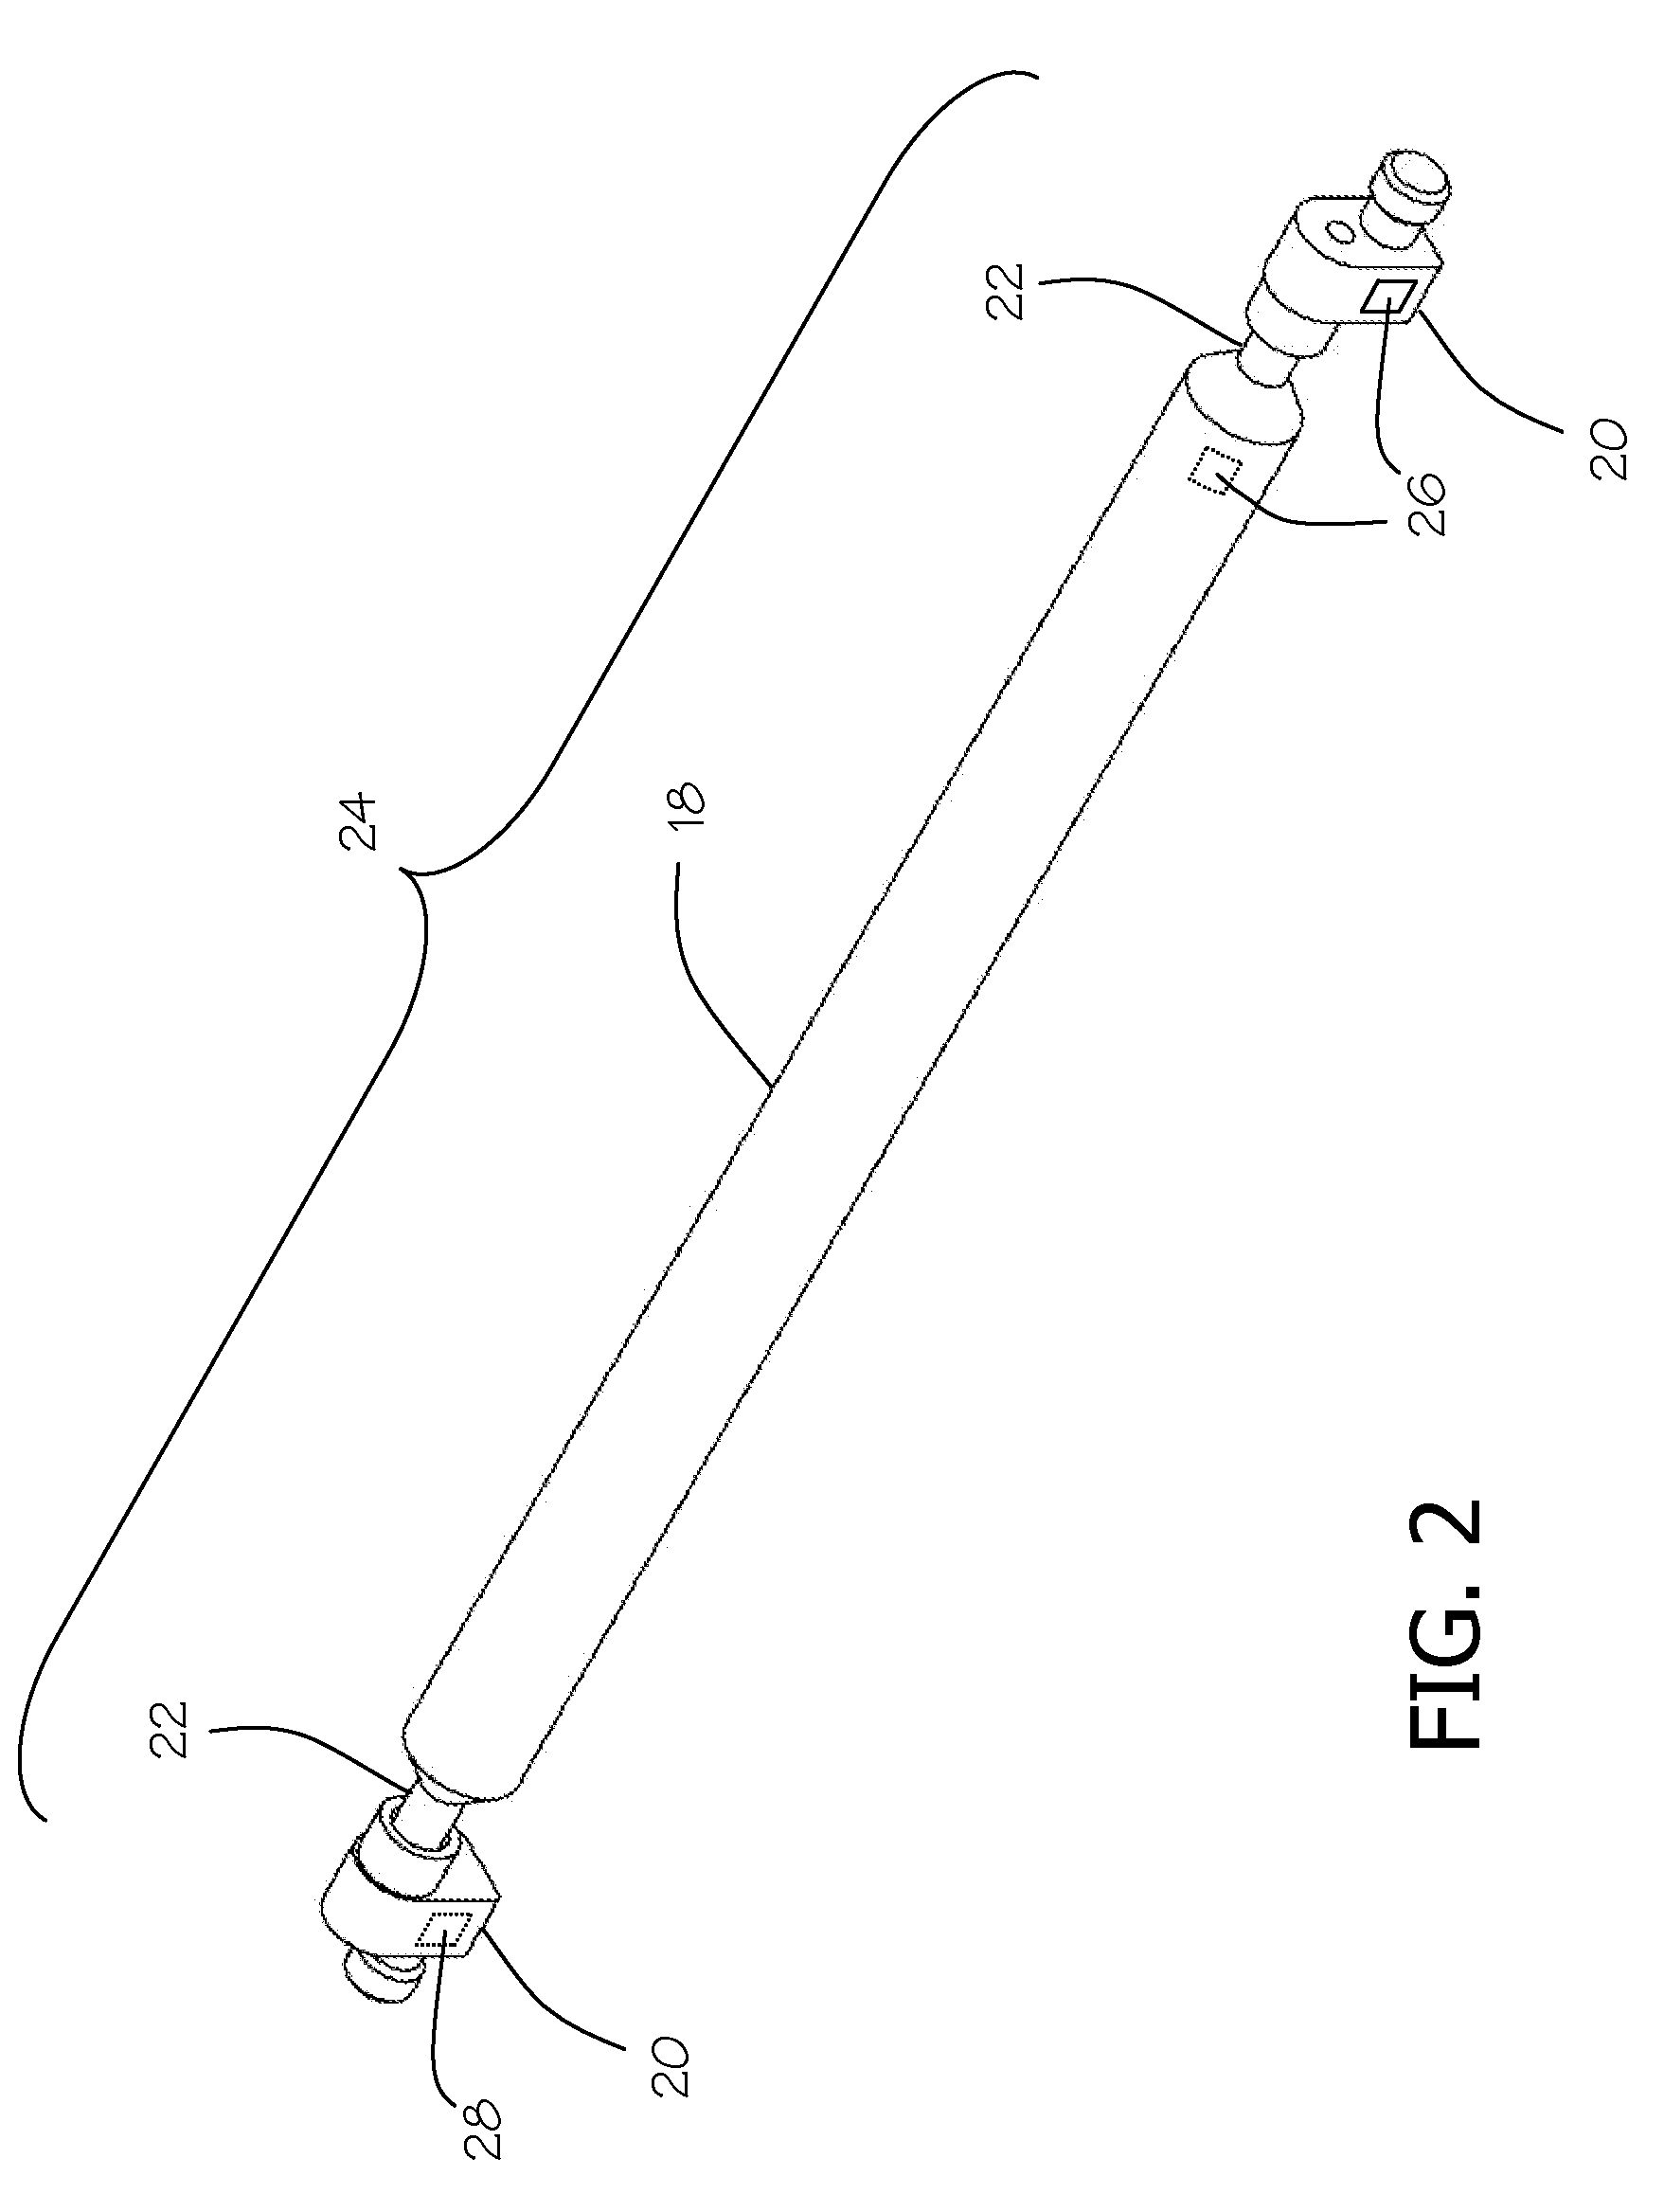 Lamp assemblies, lamp systems, and methods of operating lamp systems